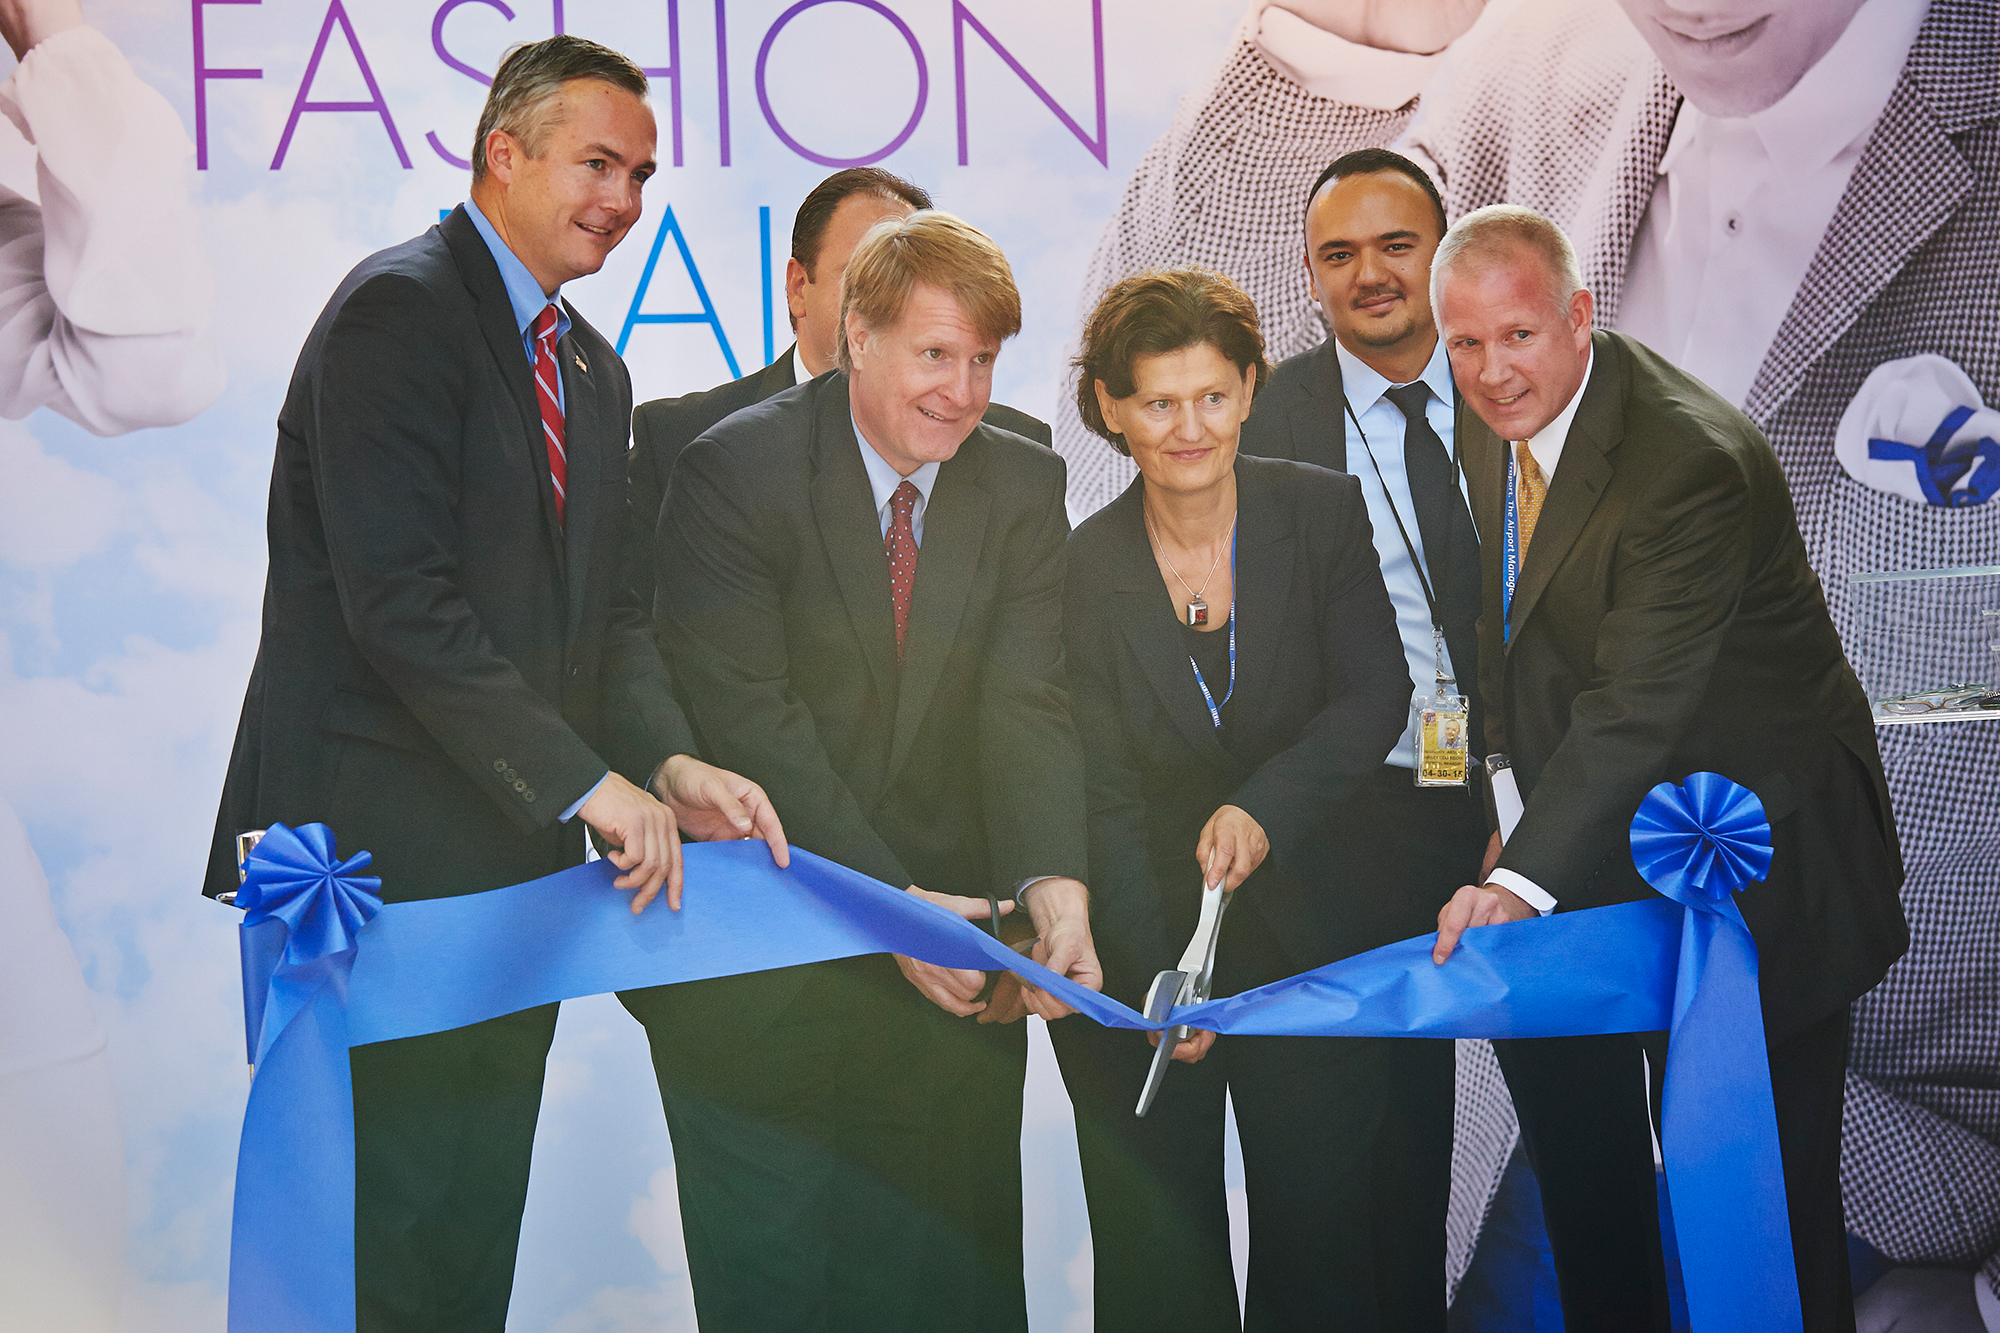 Ribbon cutting ceremony during FLY2014 event at the AIRMALL at PIT